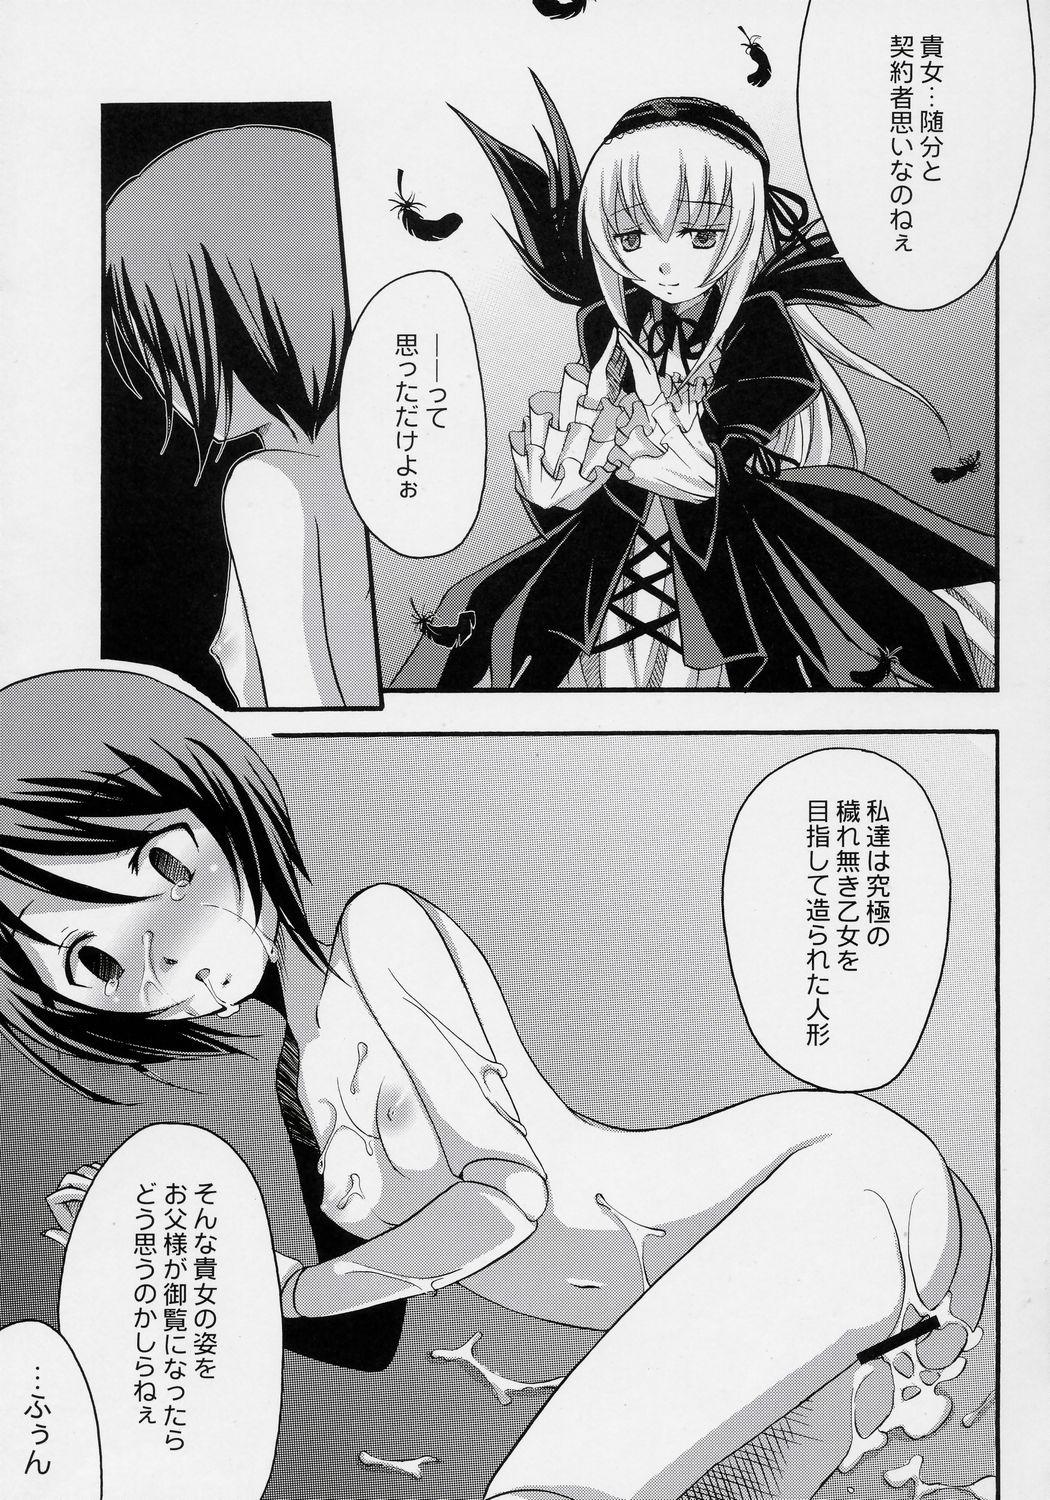 Stepmother Ginshi no Ami - Rozen maiden Colombian - Page 10